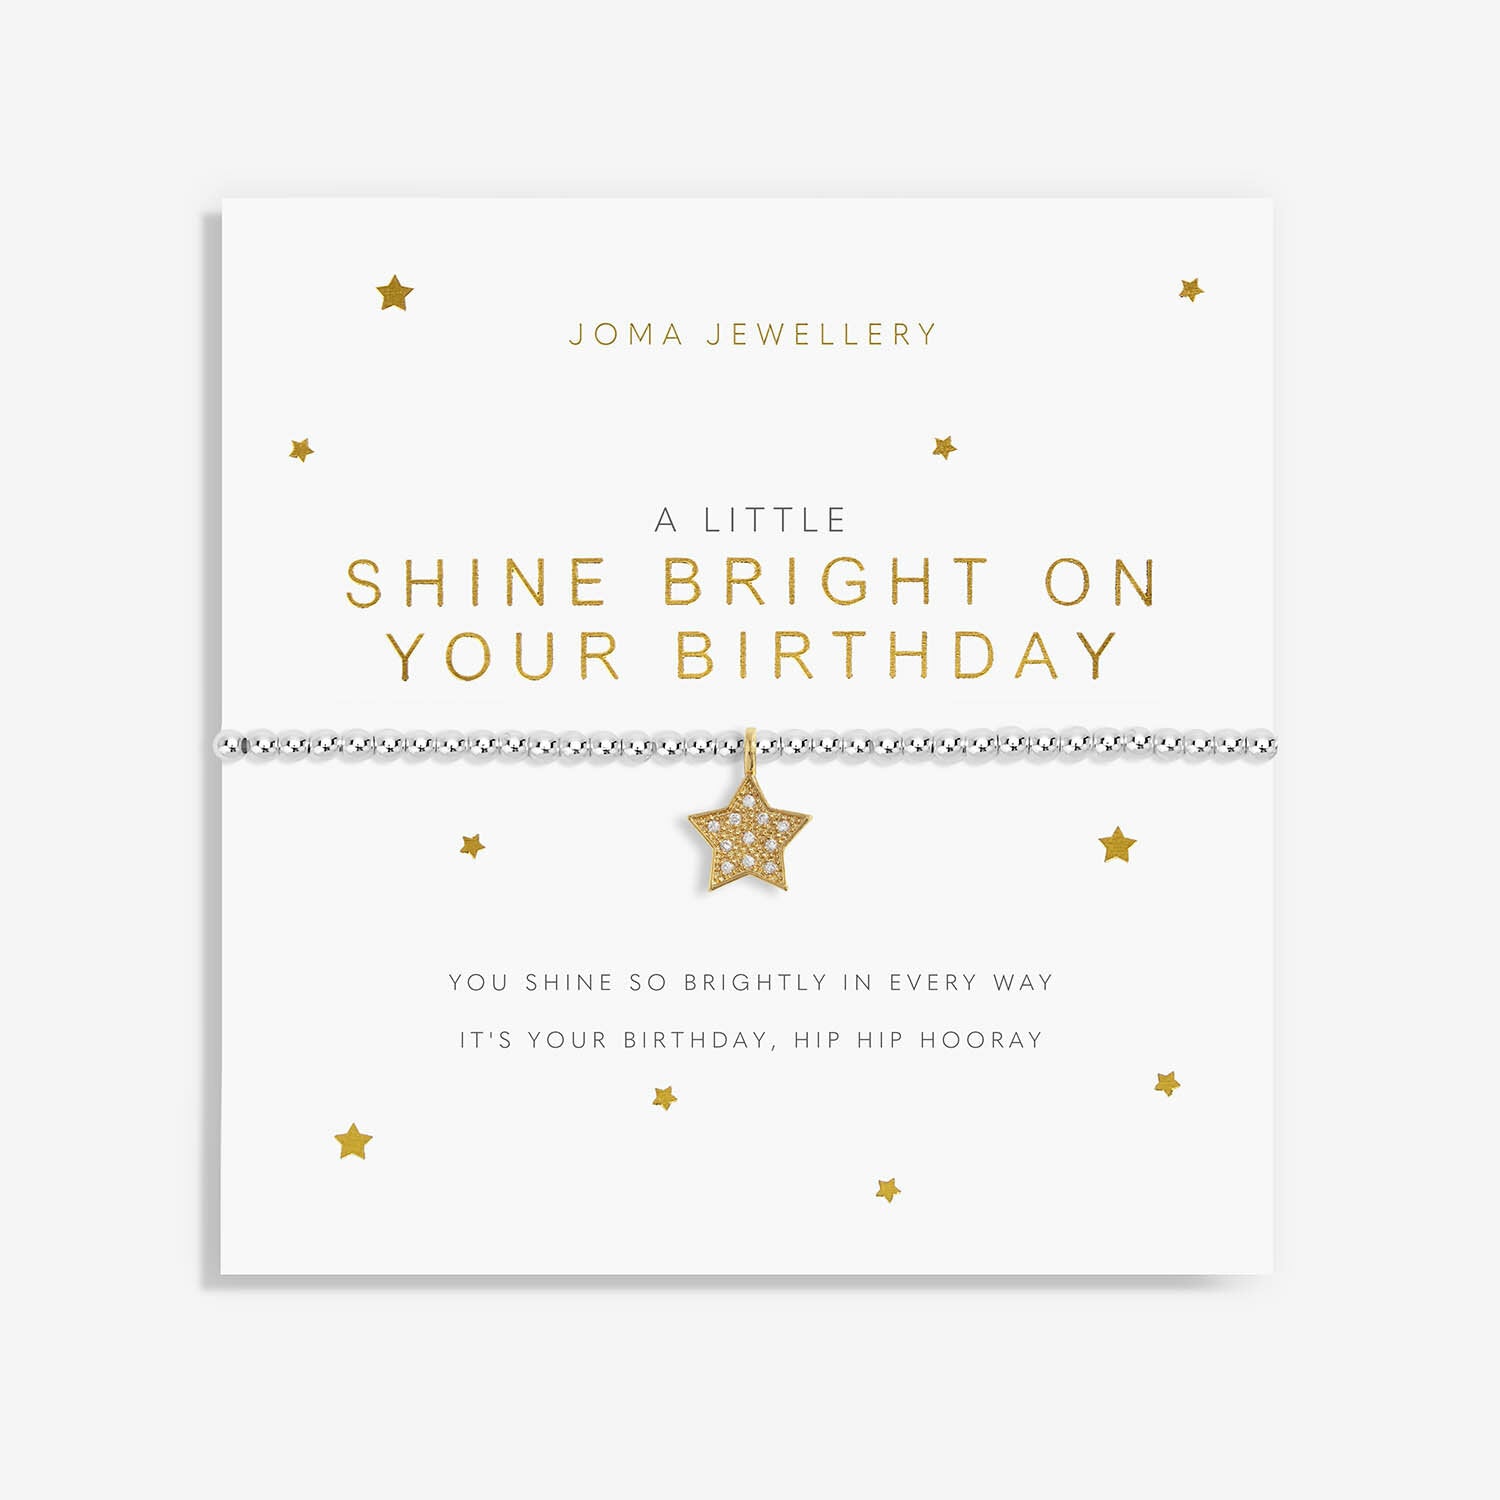 A Little Shine Bright On Your Birthday - Joma Jewellery